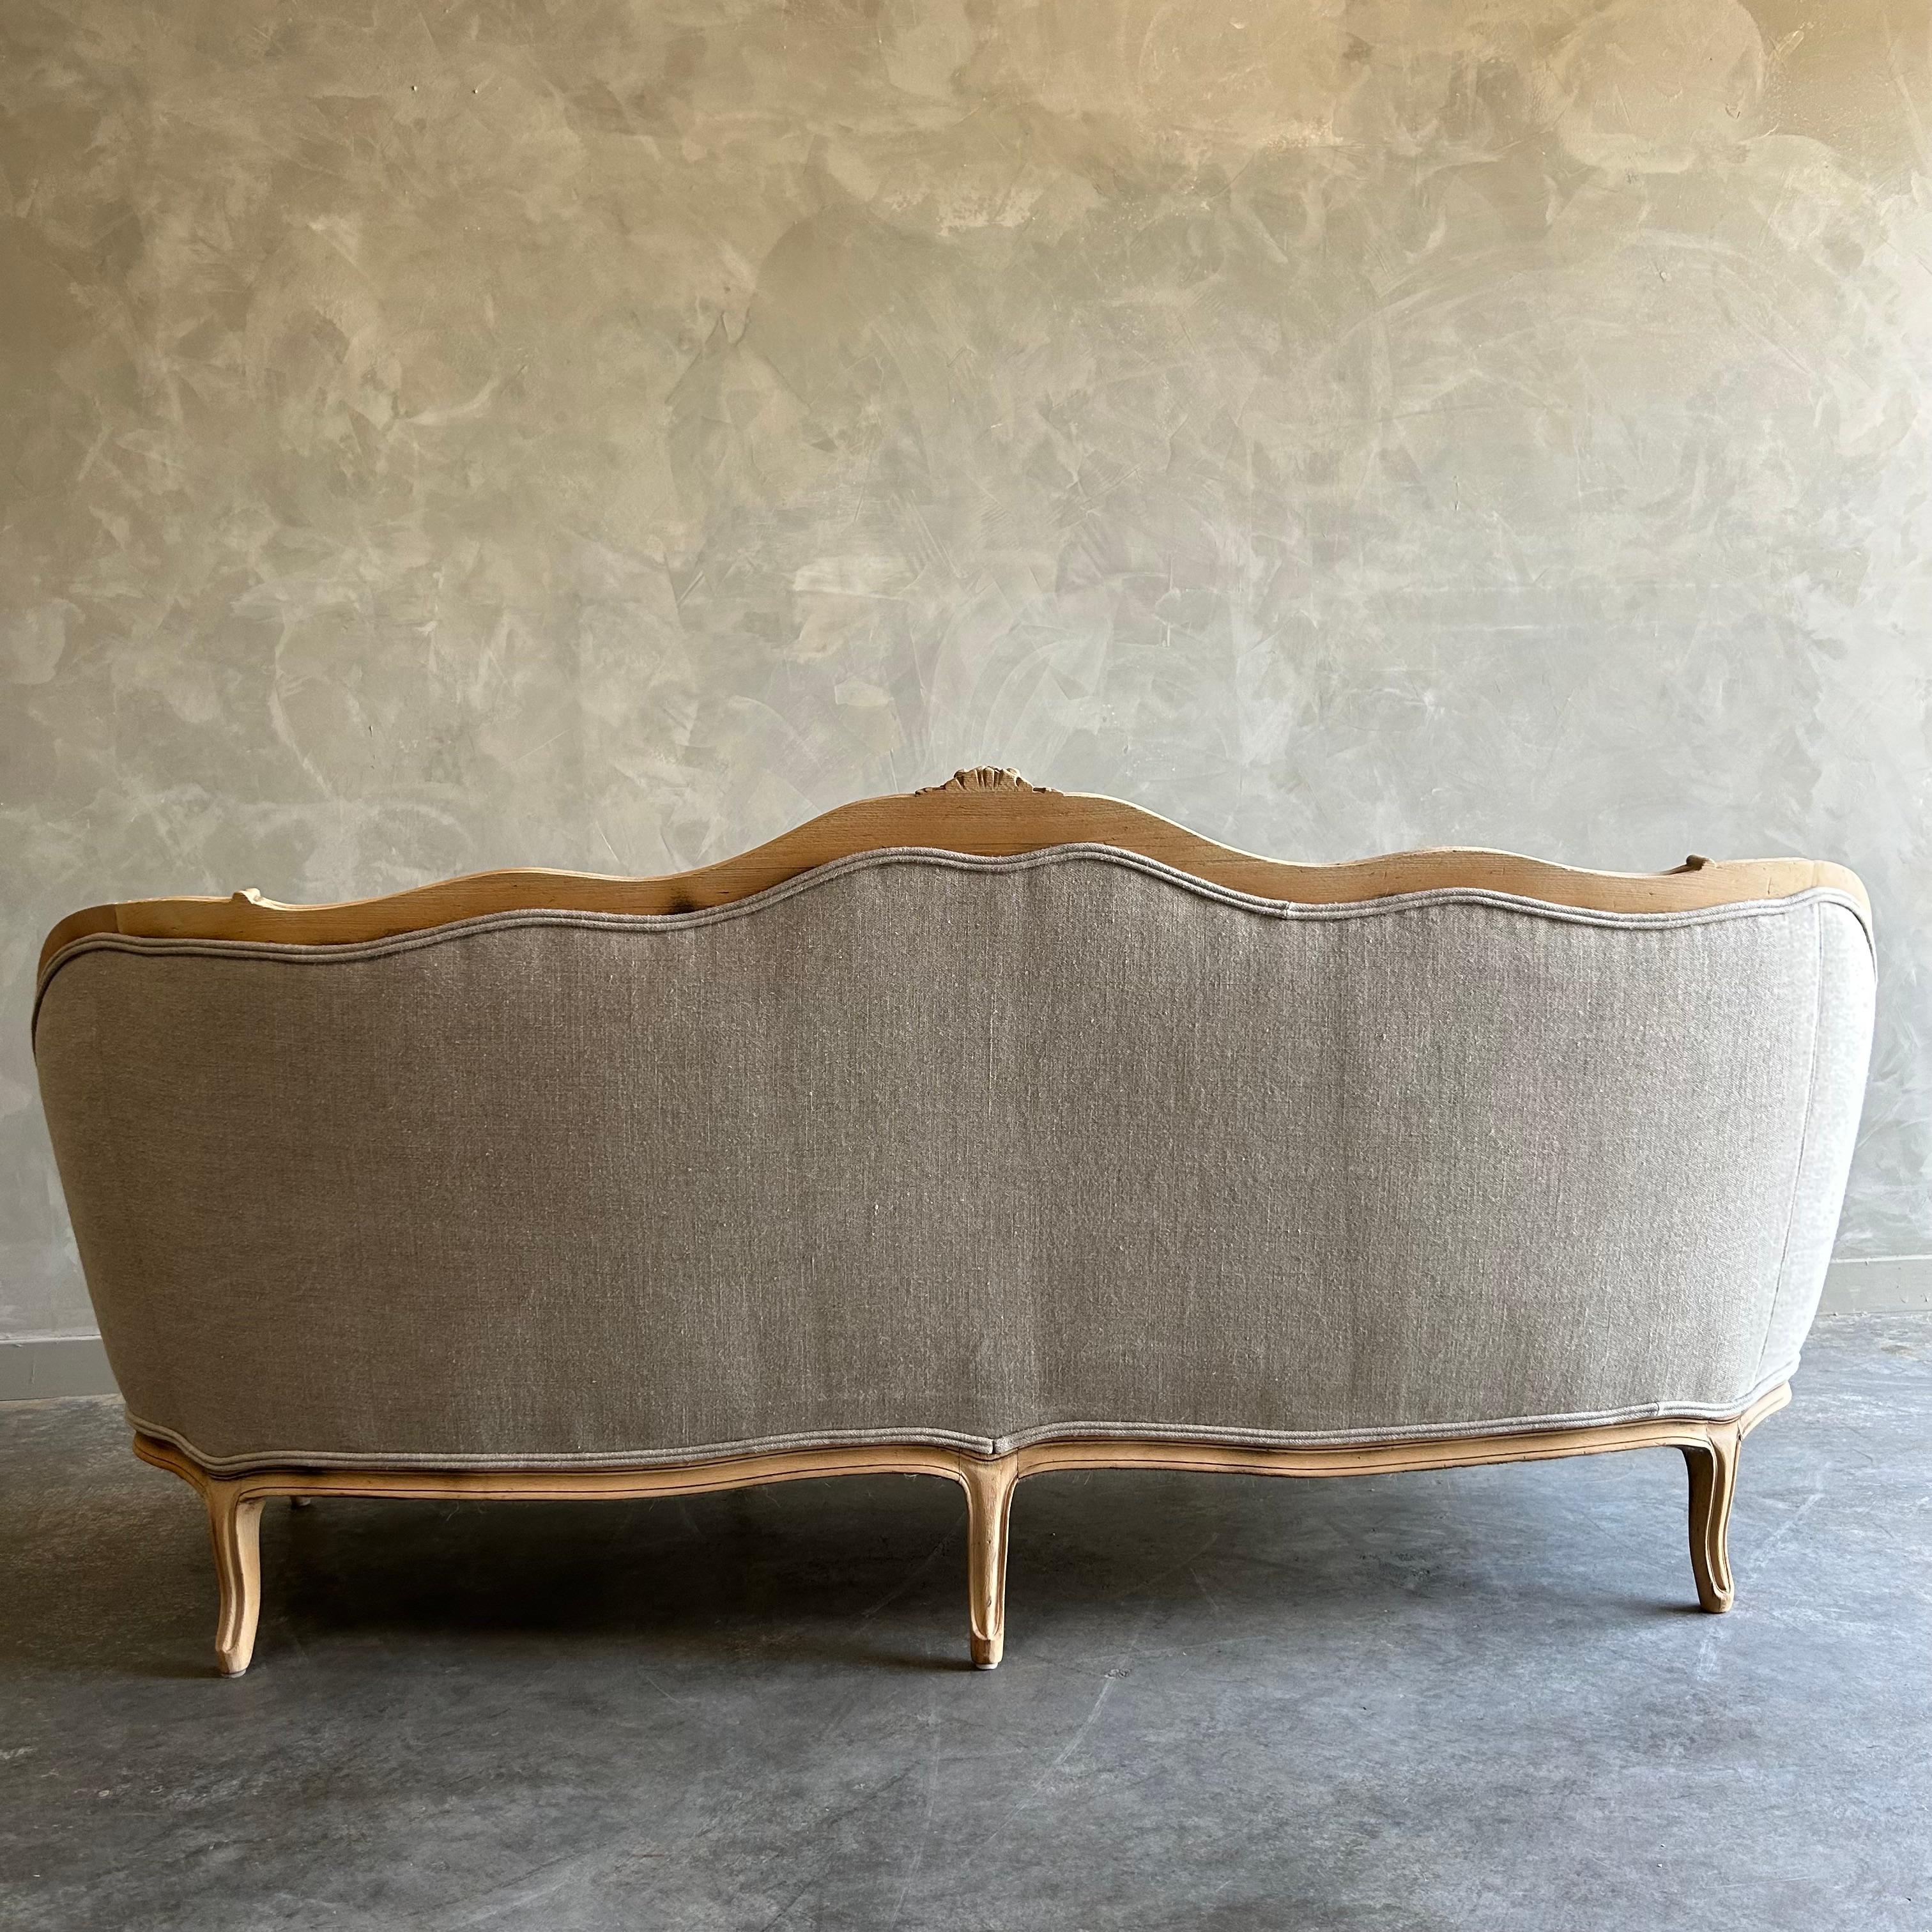 20th Century Antique French Louis XV Style Sofa in Bleached Oak and Irish Linen Upholstery